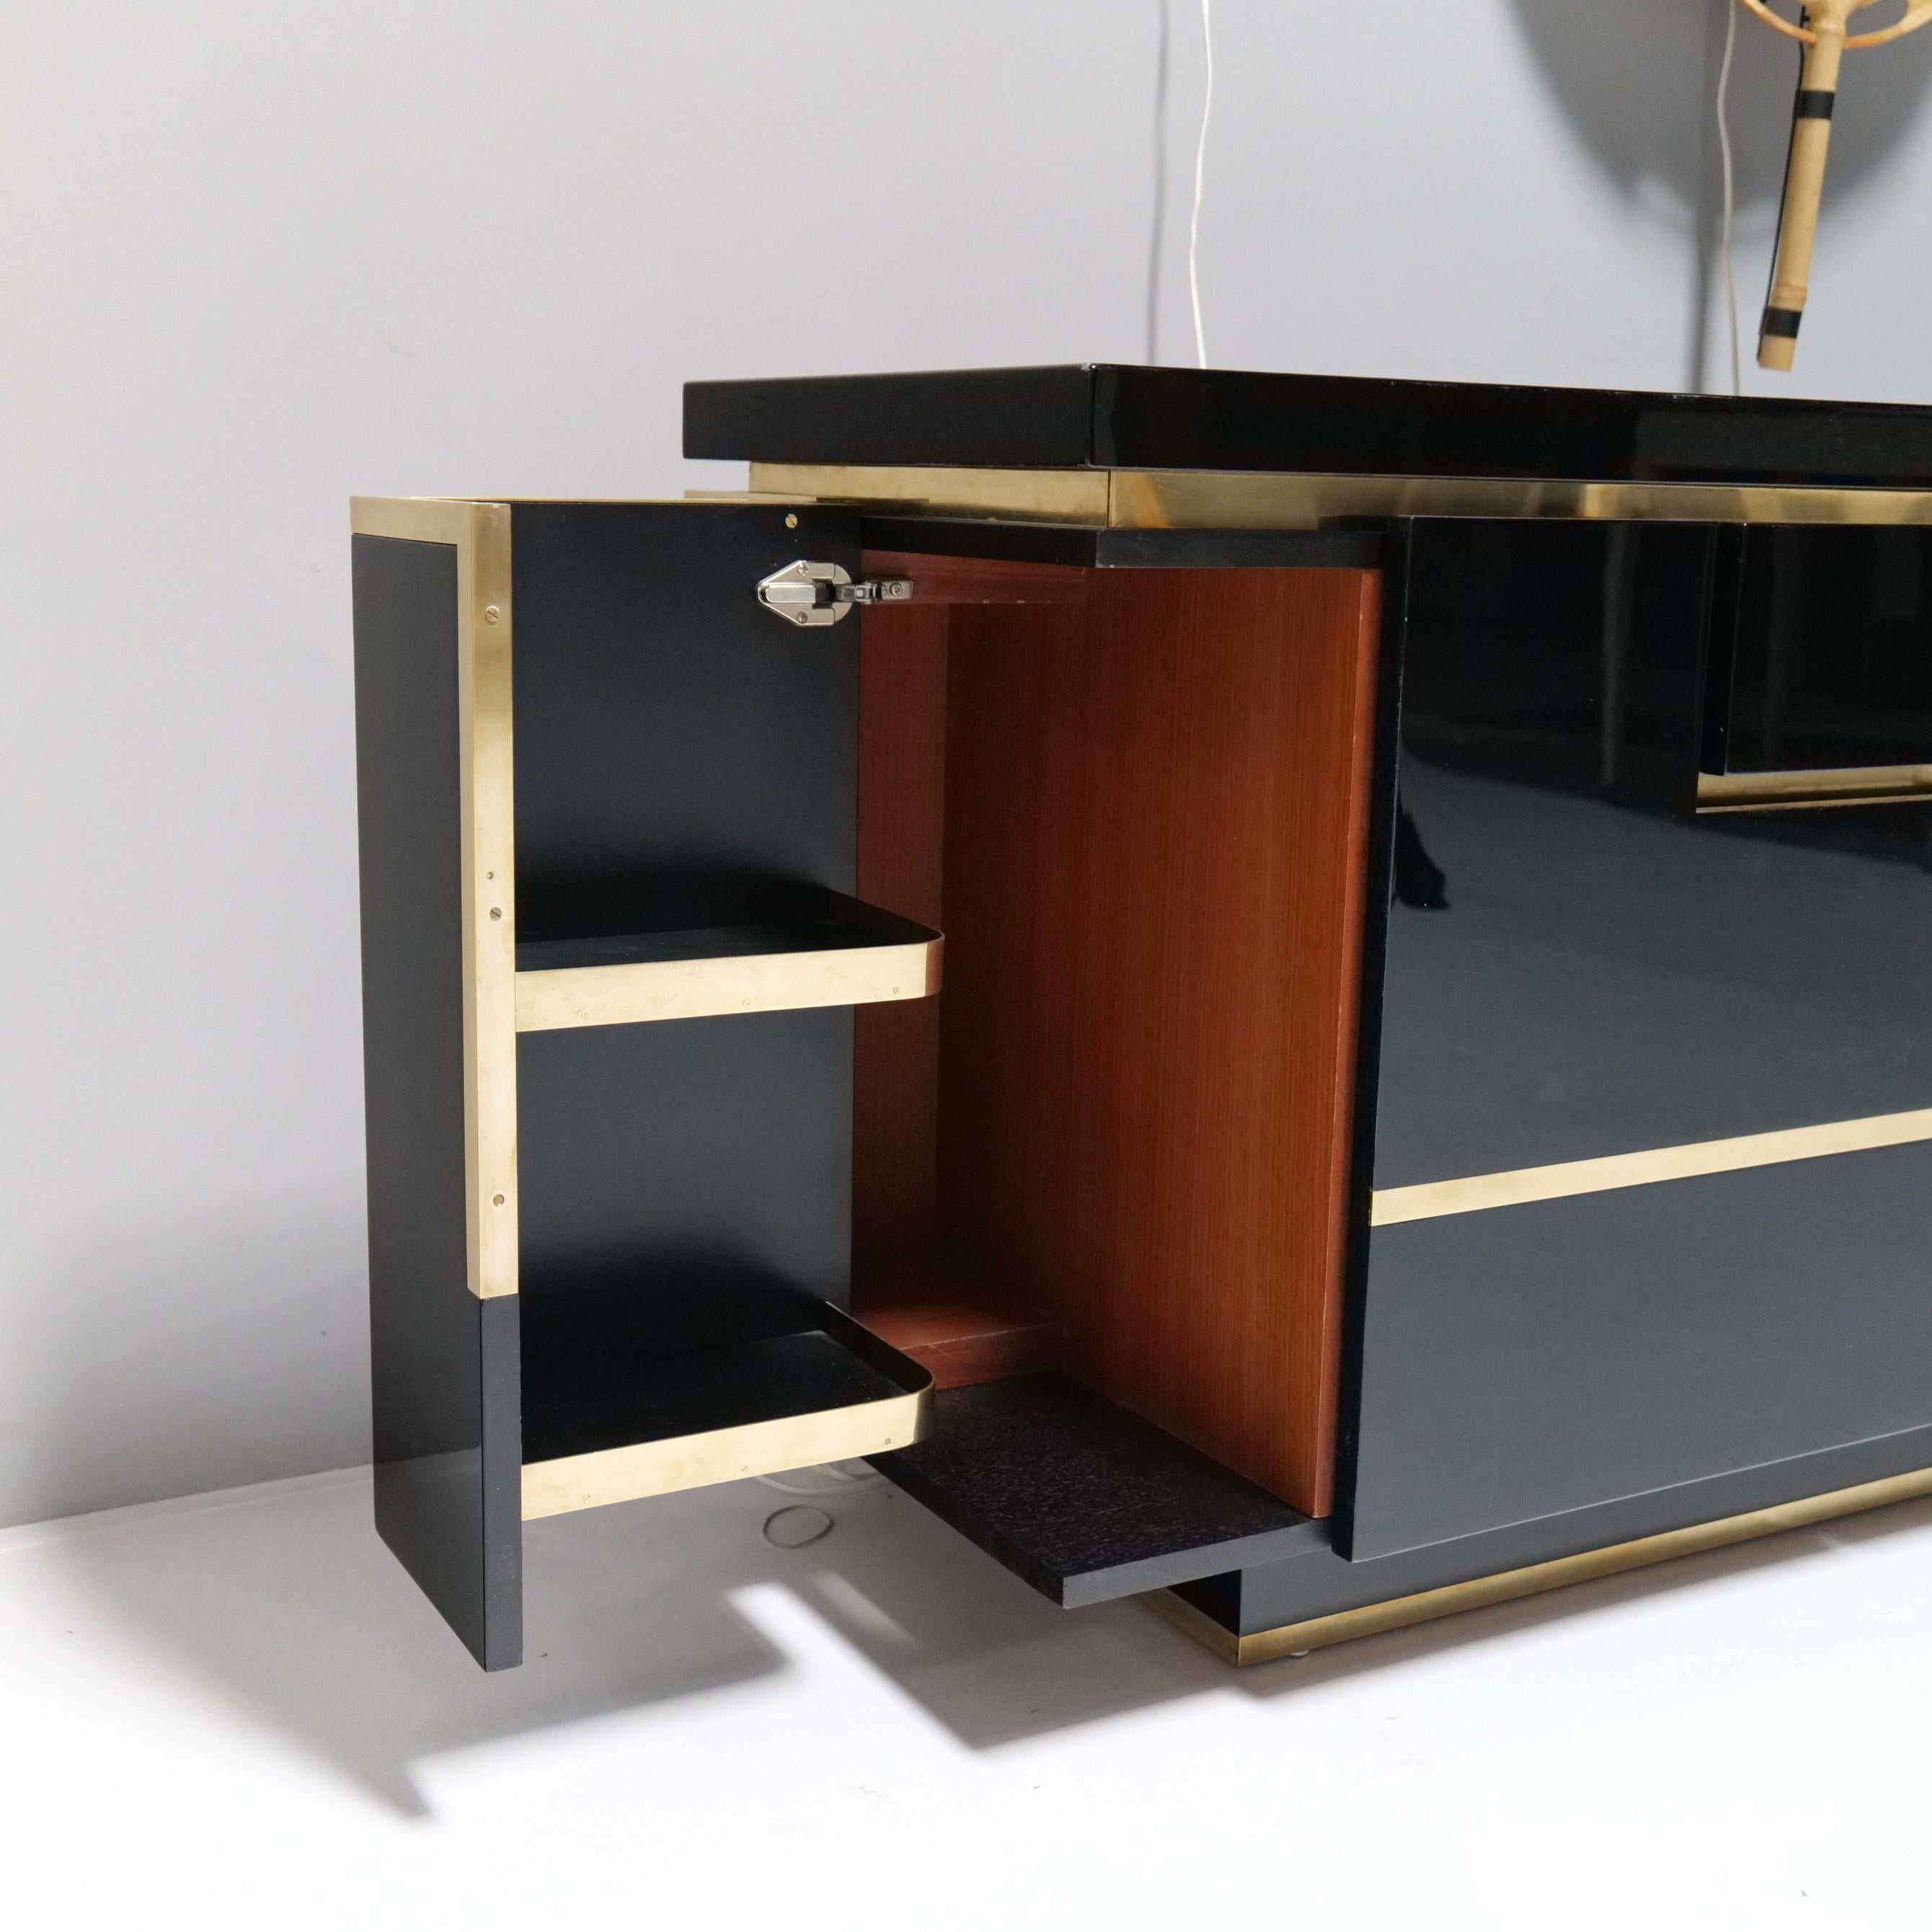 Jean Claude Mahey Highgloss Black Lacquer Sideboard, 1970s For Sale 2